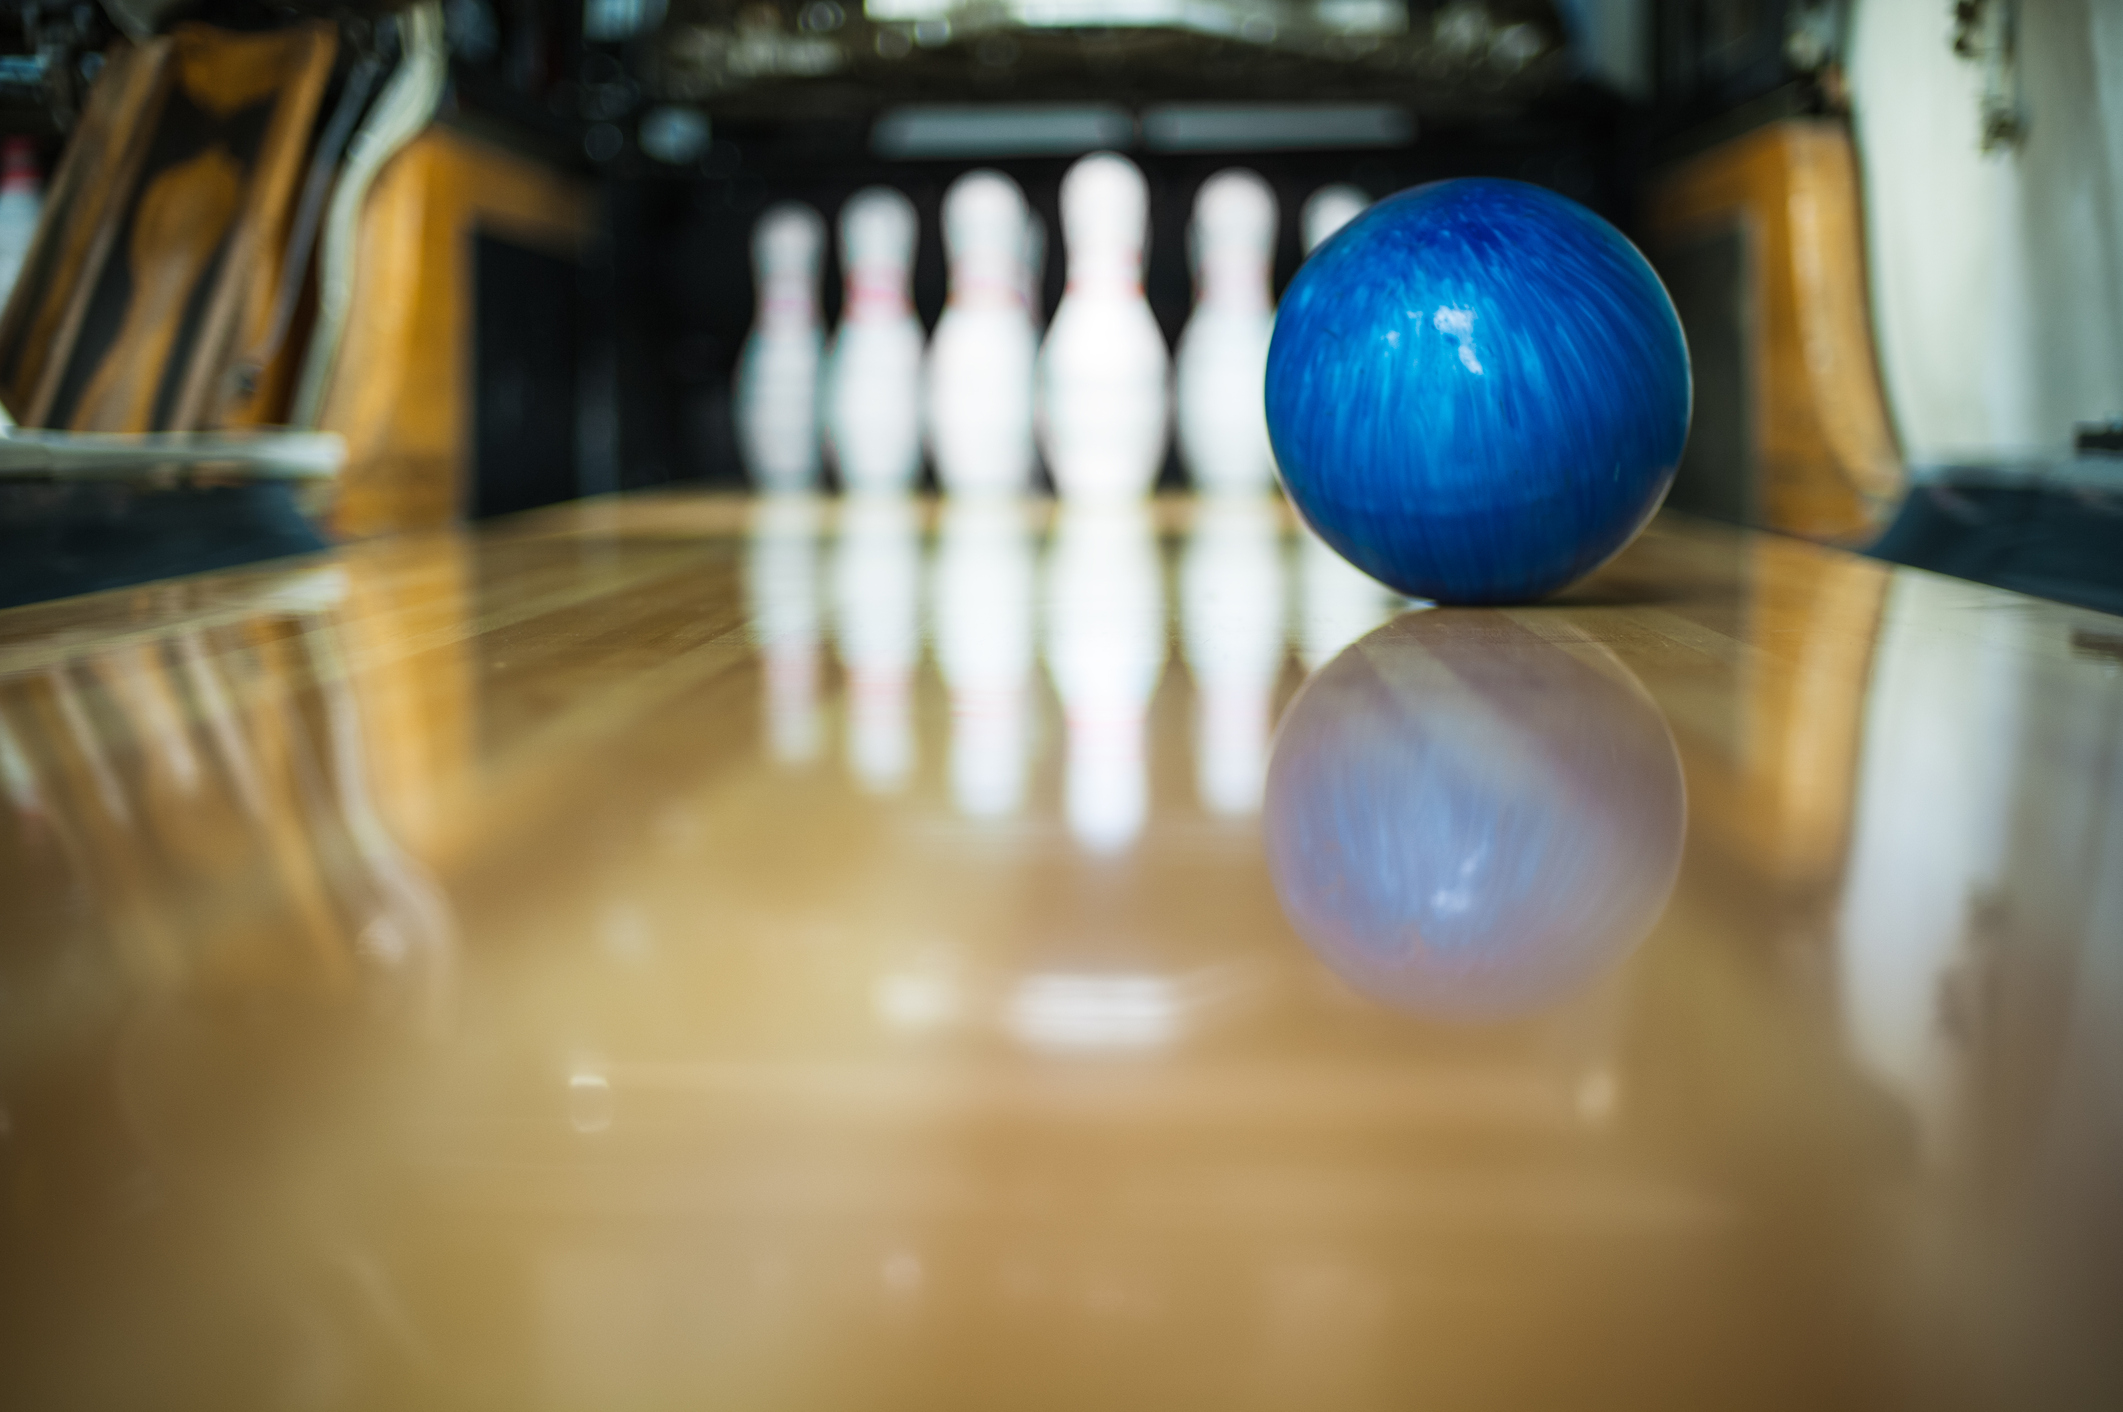   Strike!  Bowling + Life Parallels. By Mary Ann DiLorenzo  